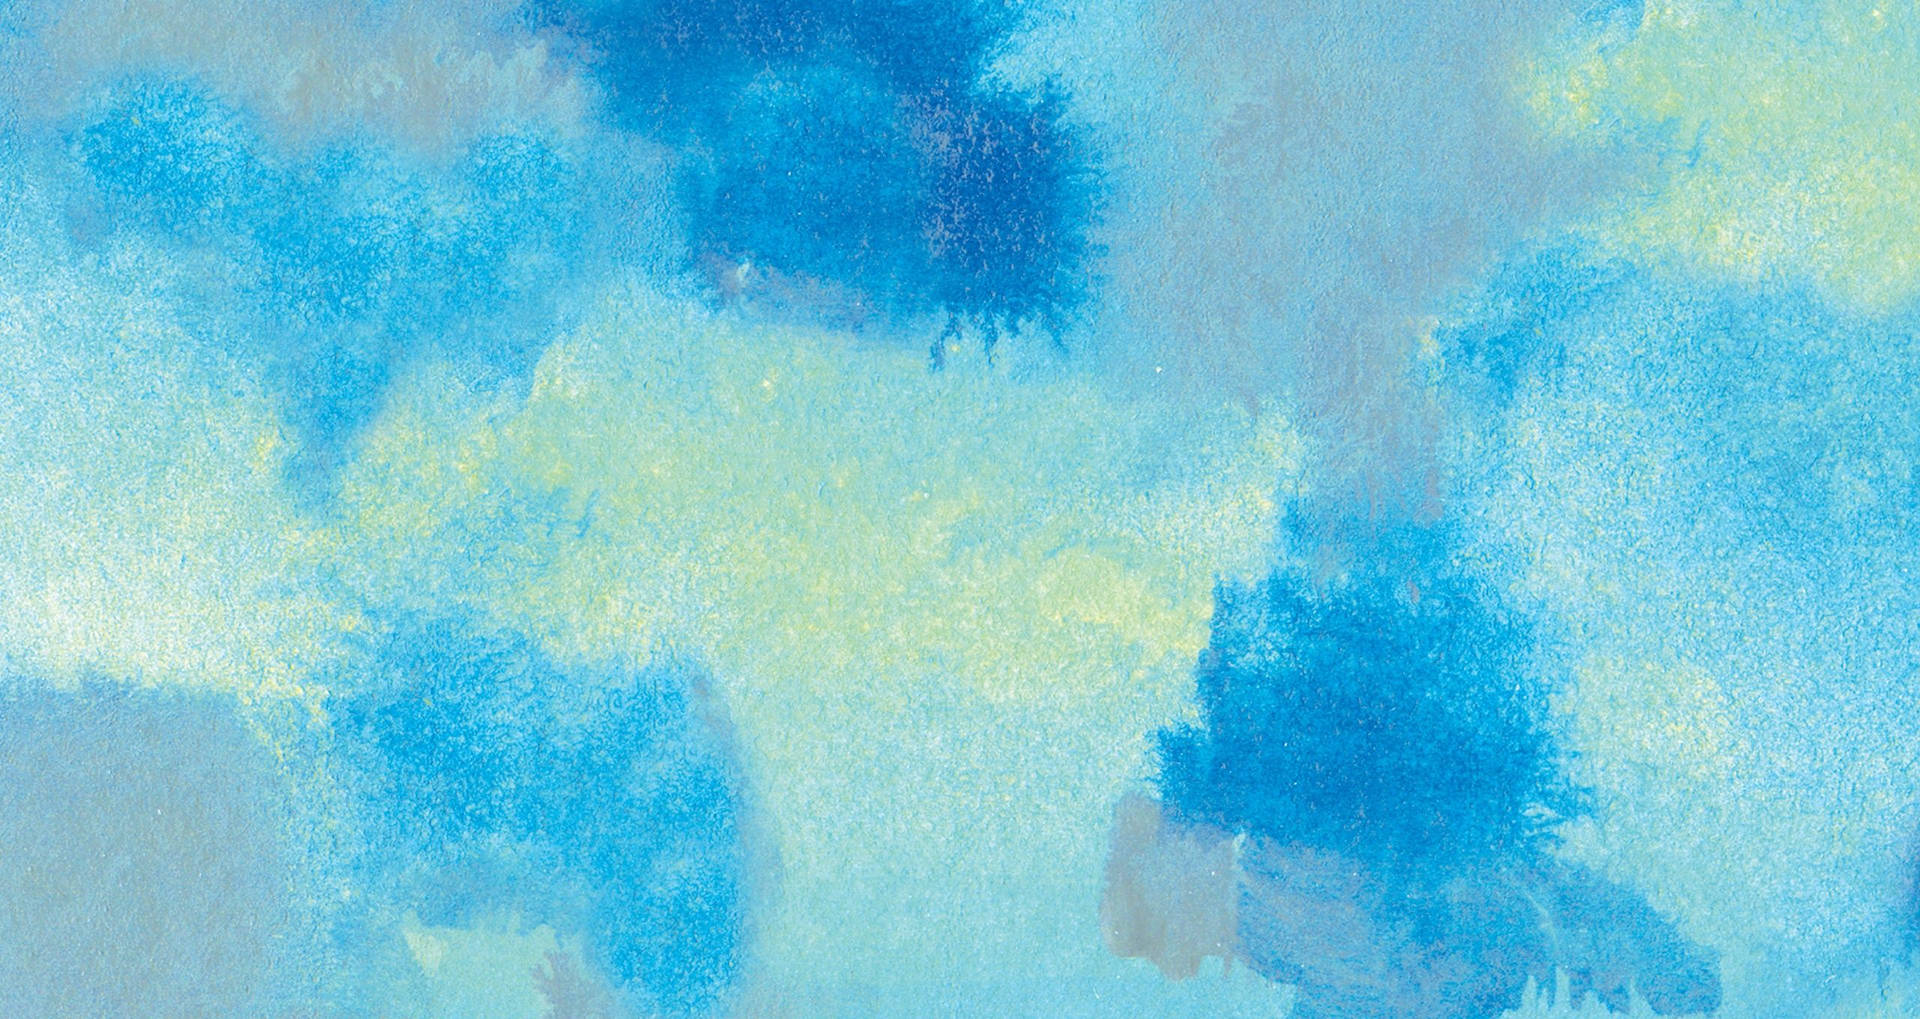 A Blue And Yellow Abstract Painting Wallpaper